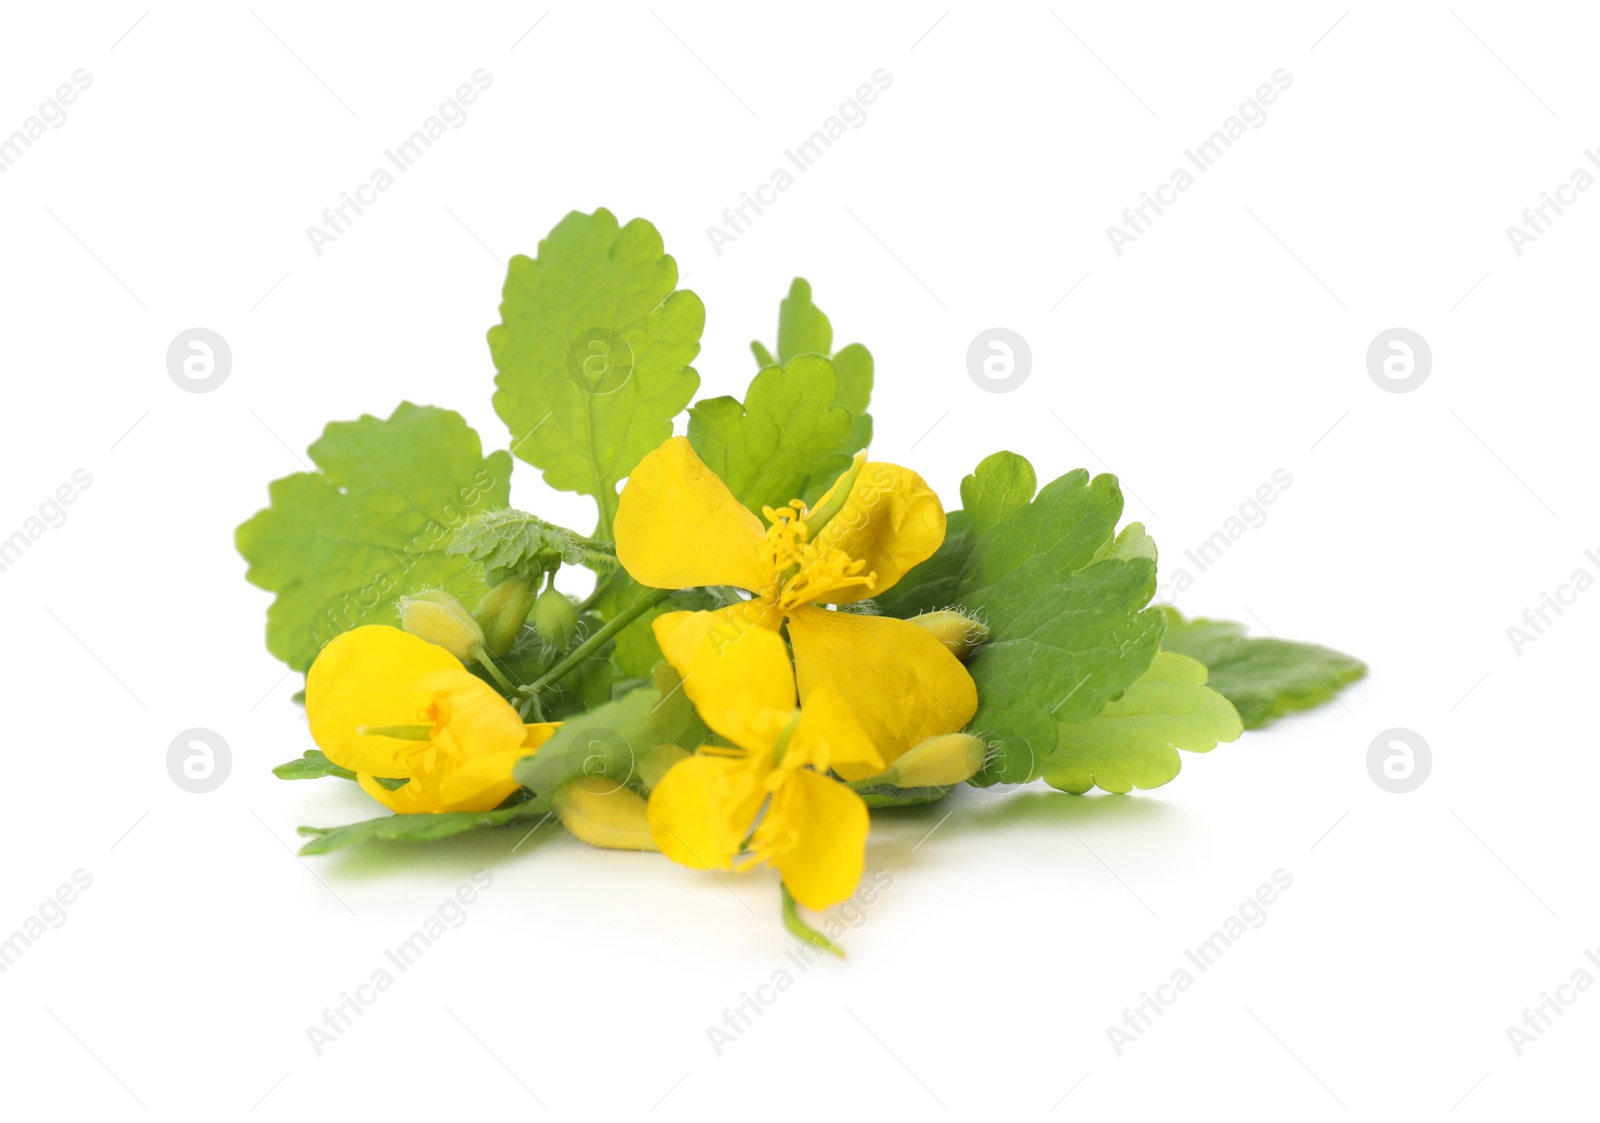 Photo of Celandine with yellow flowers and green leaves isolated on white